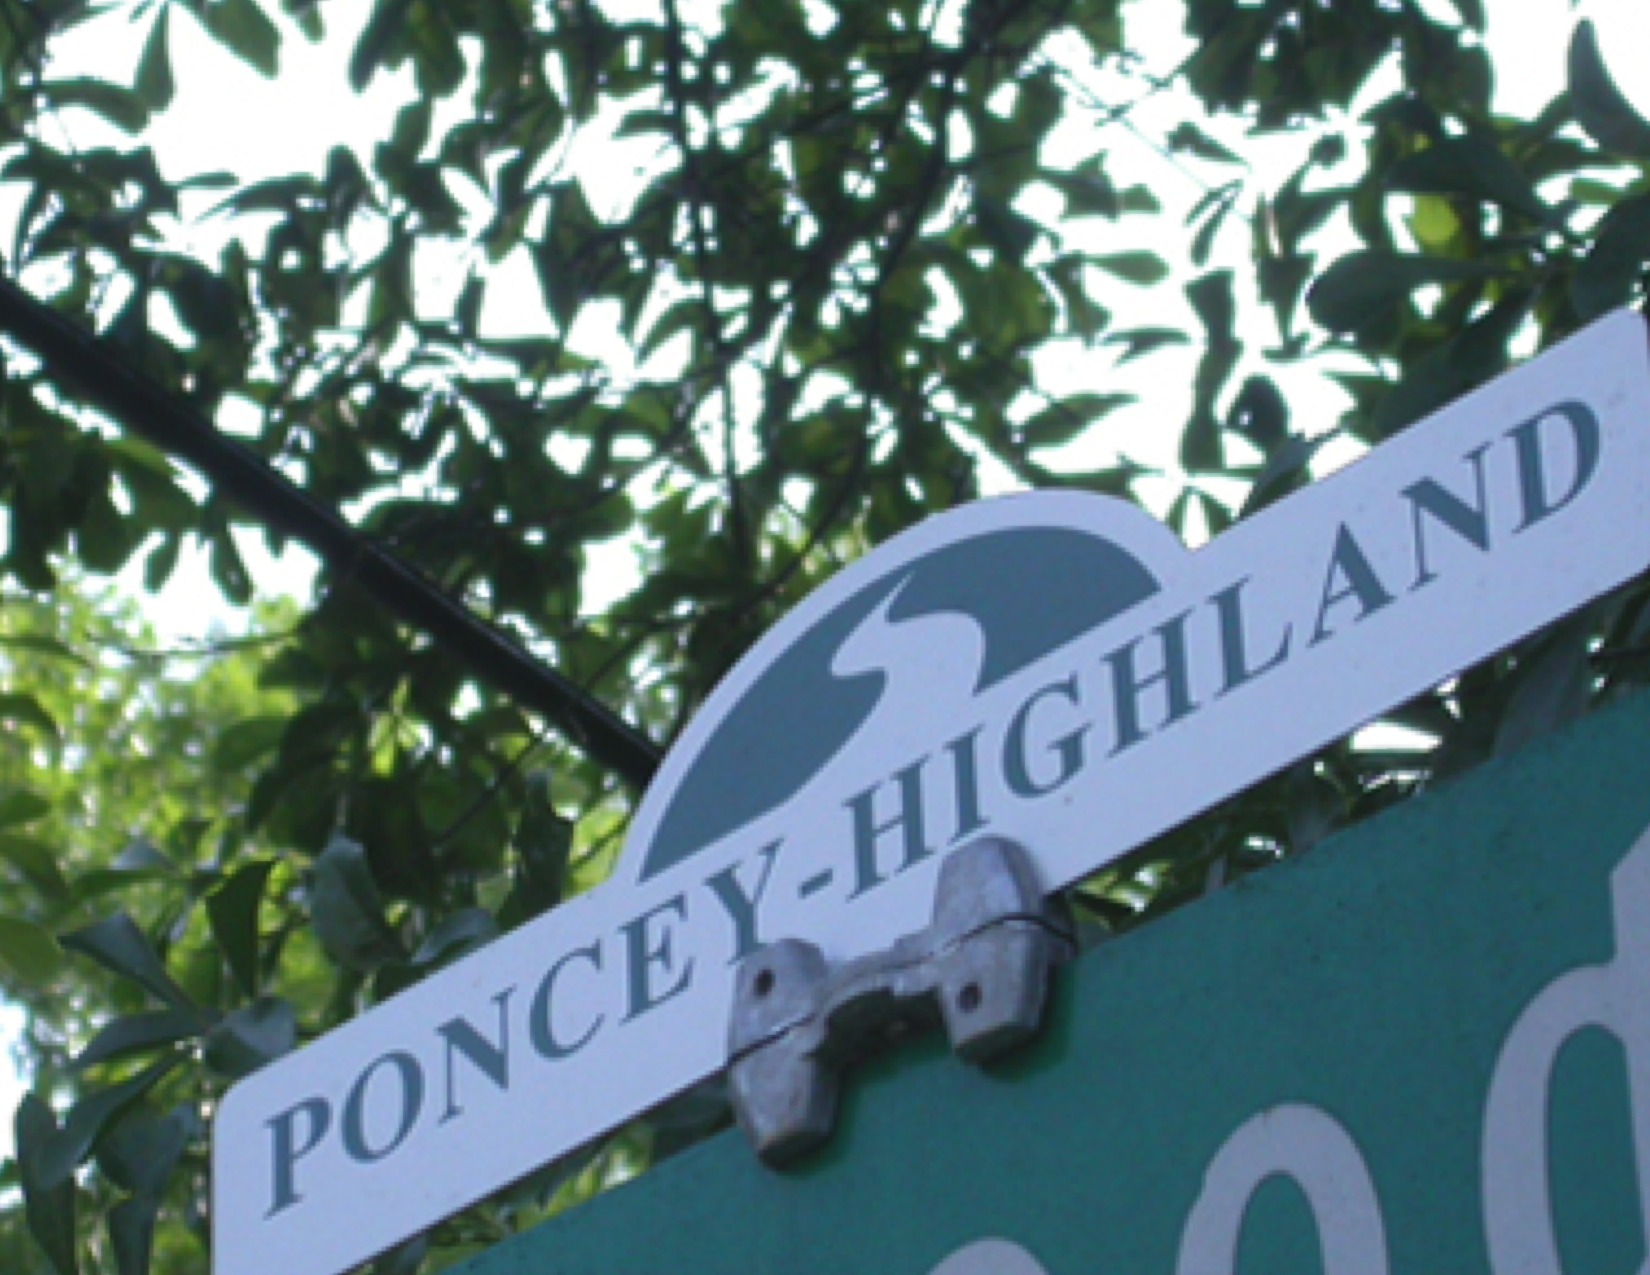 HIGHLAND PSYCH - Located in the Poncey-Highland Atlanta Neighborhood